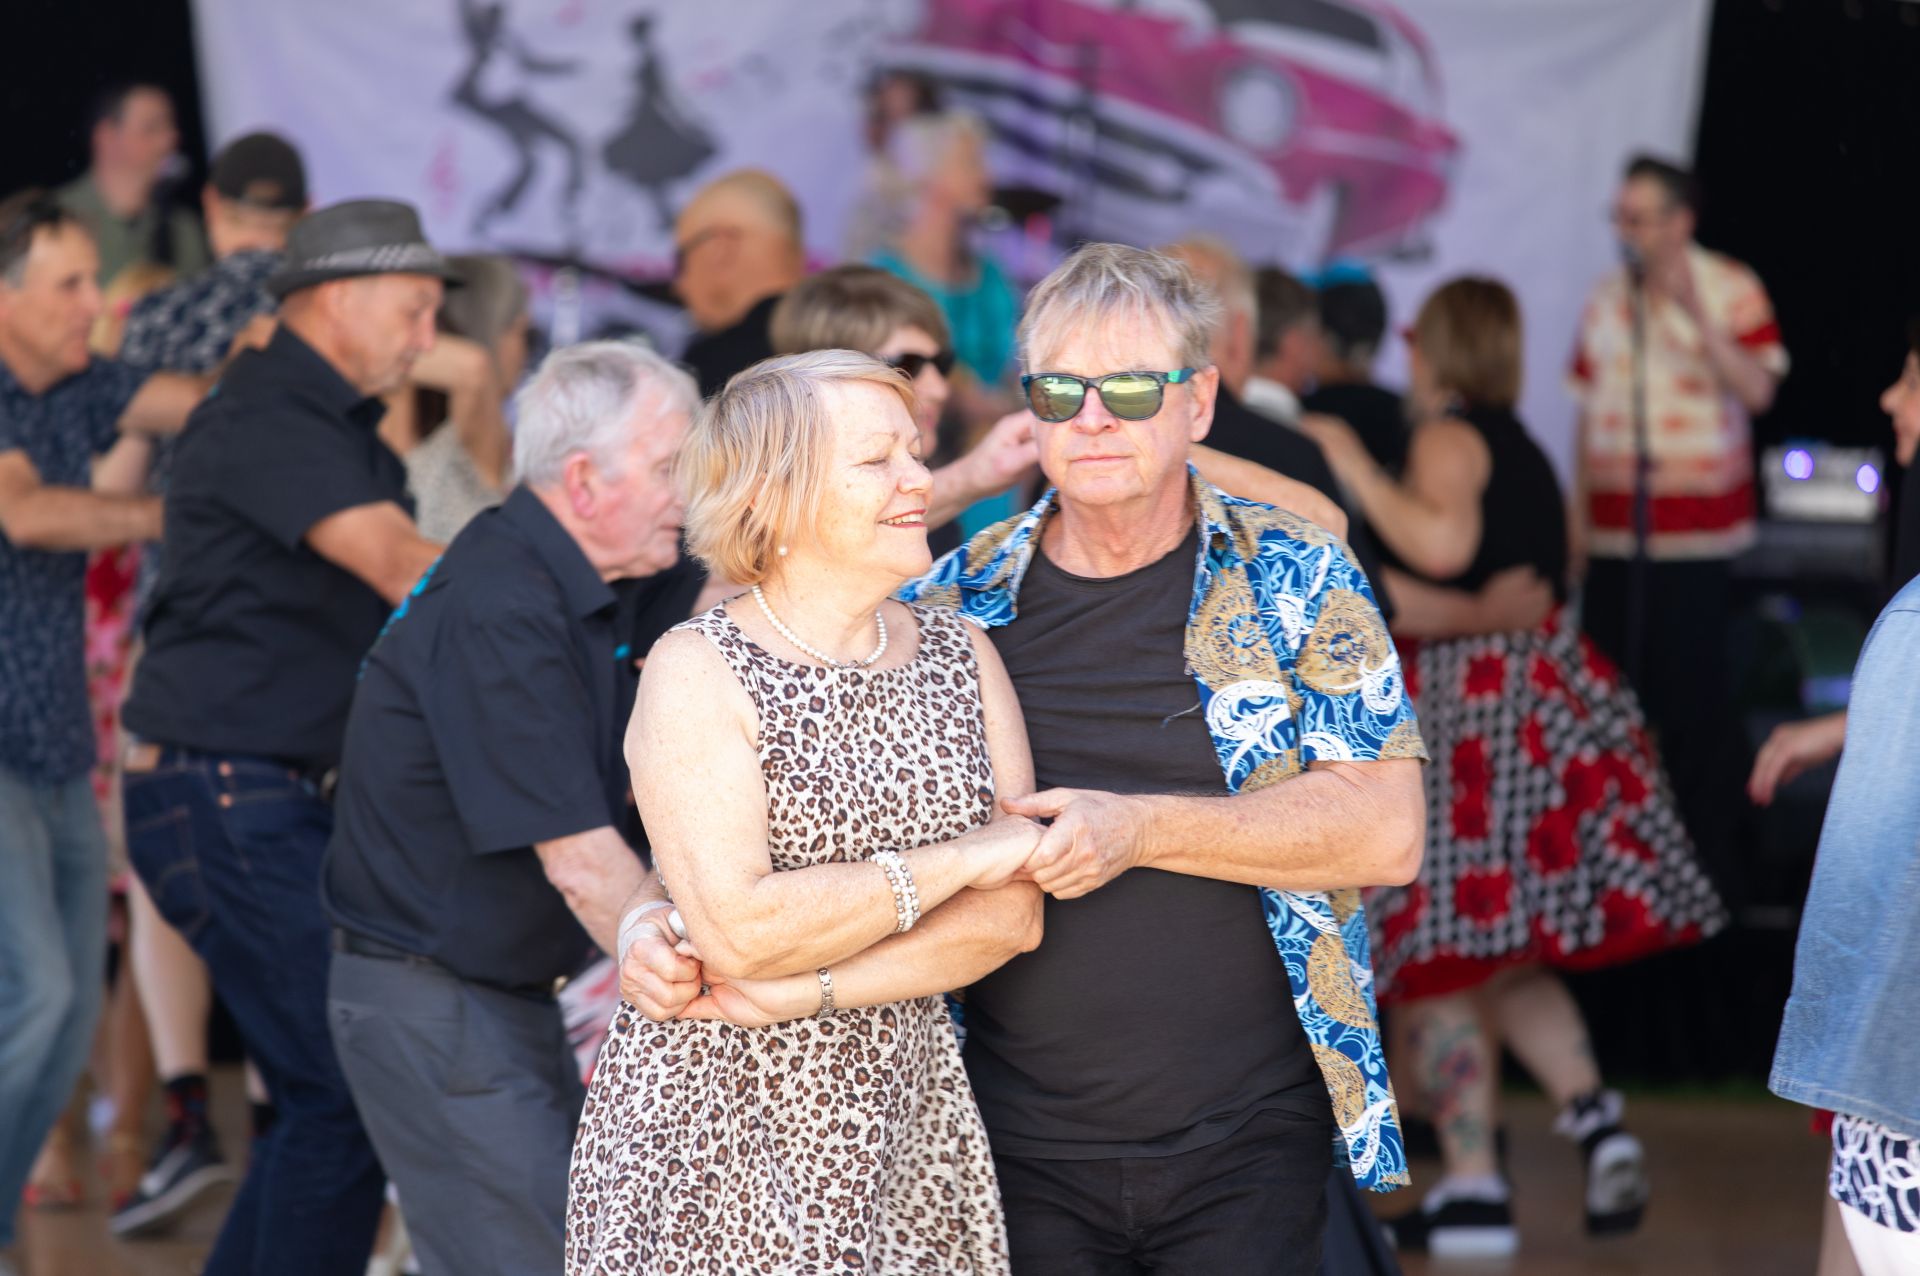 Dancing couple at 2023 Rock 'N' Roll Festival